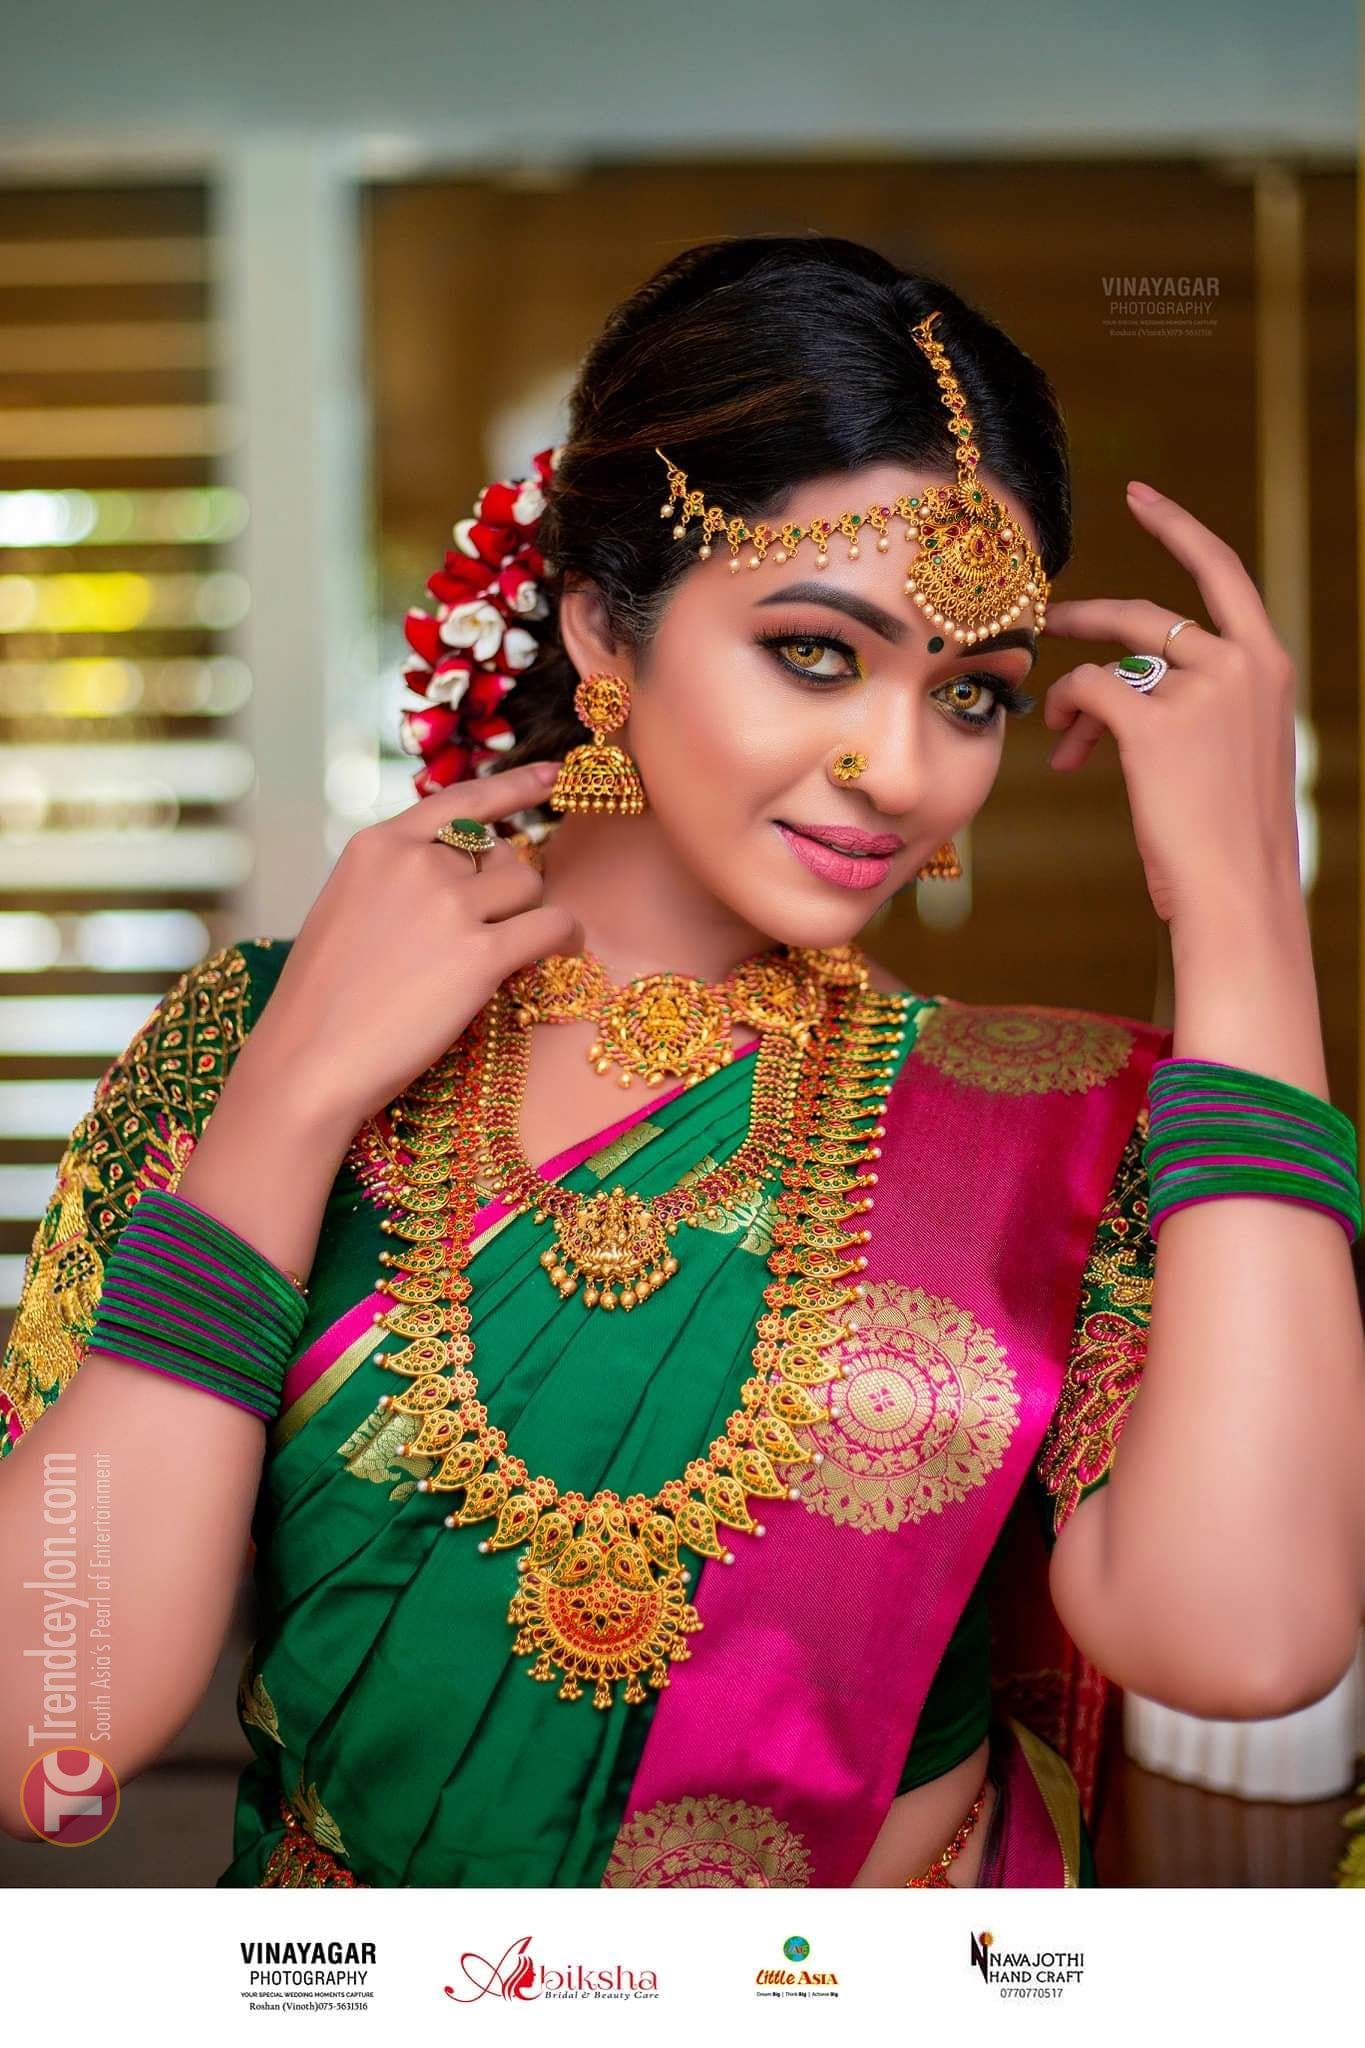 This Traditional Saree looks like it is made for Thara Kaluarachchi.